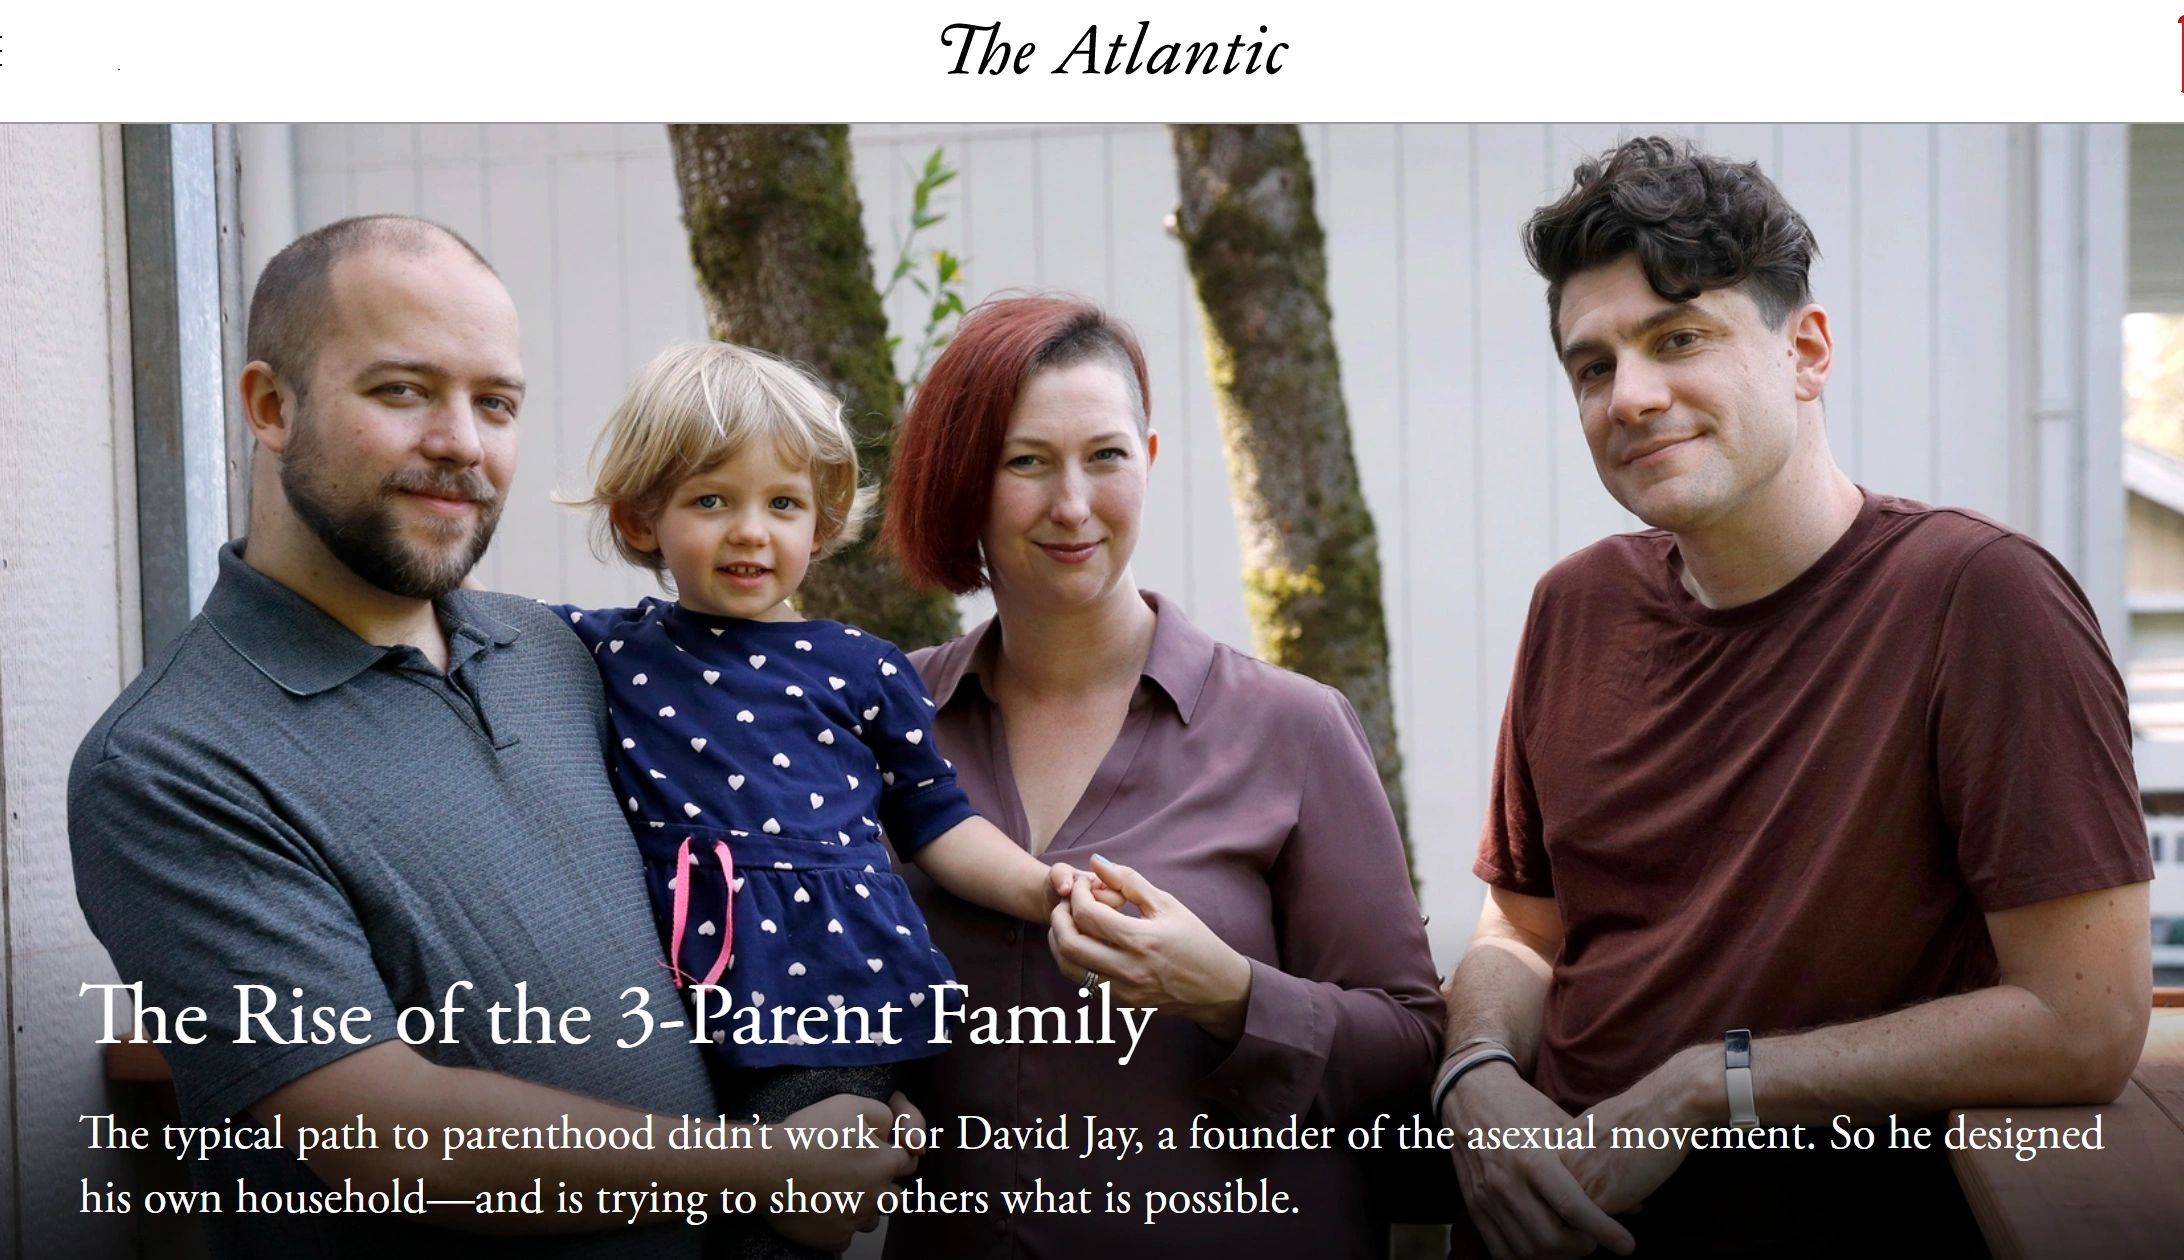 9/22/20 The Atlantic: The Rise of the 3-Parent Family